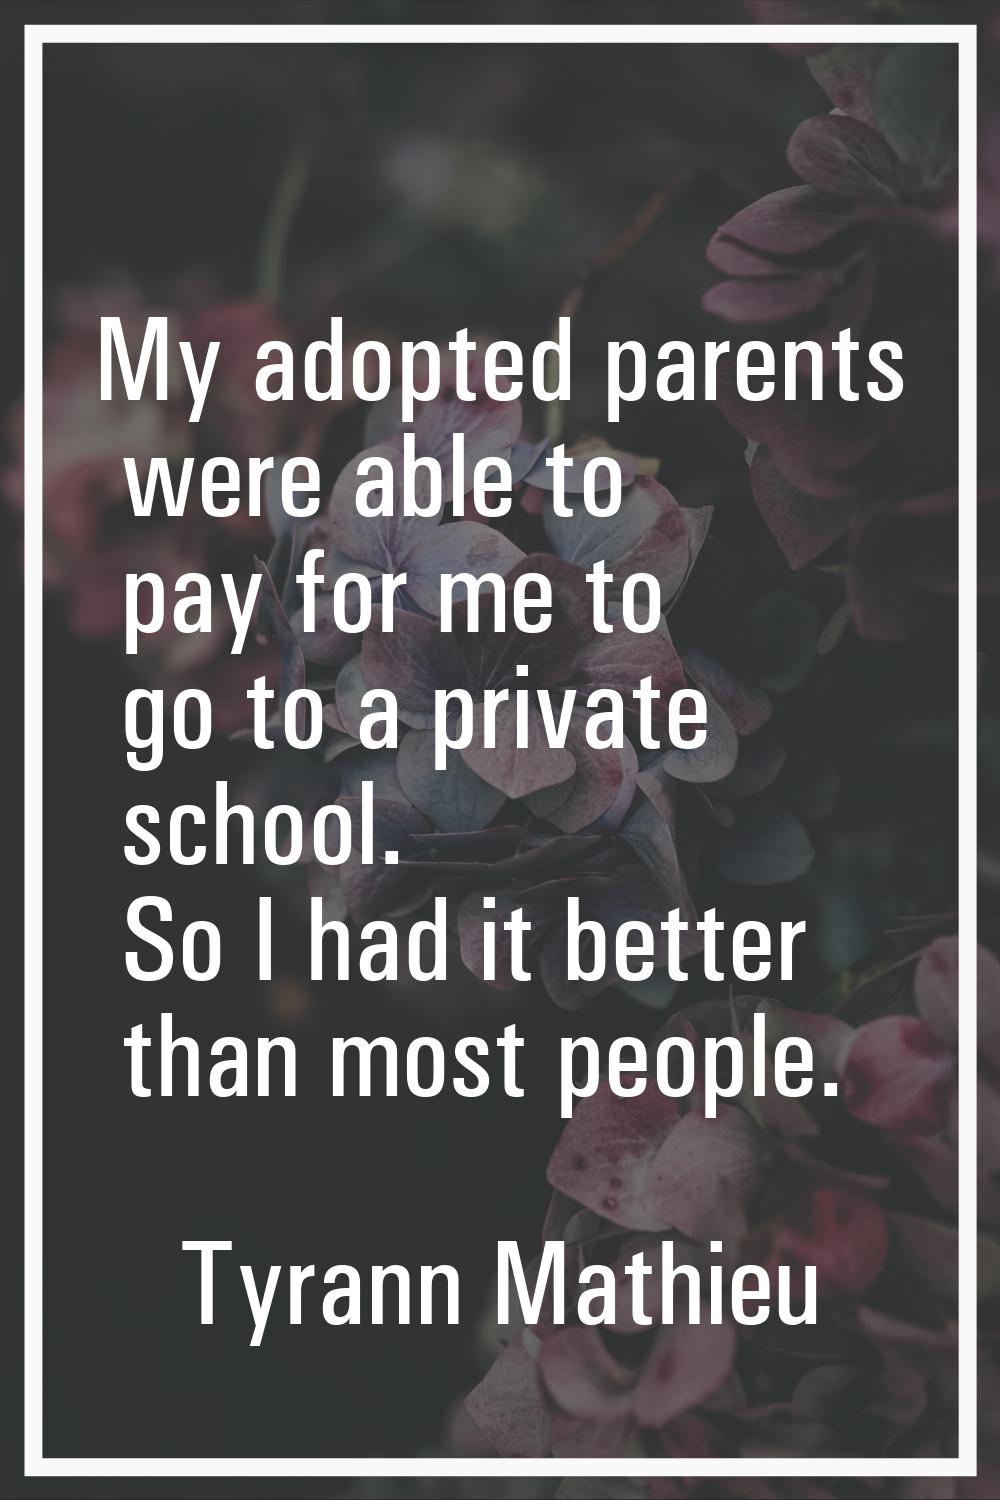 My adopted parents were able to pay for me to go to a private school. So I had it better than most 